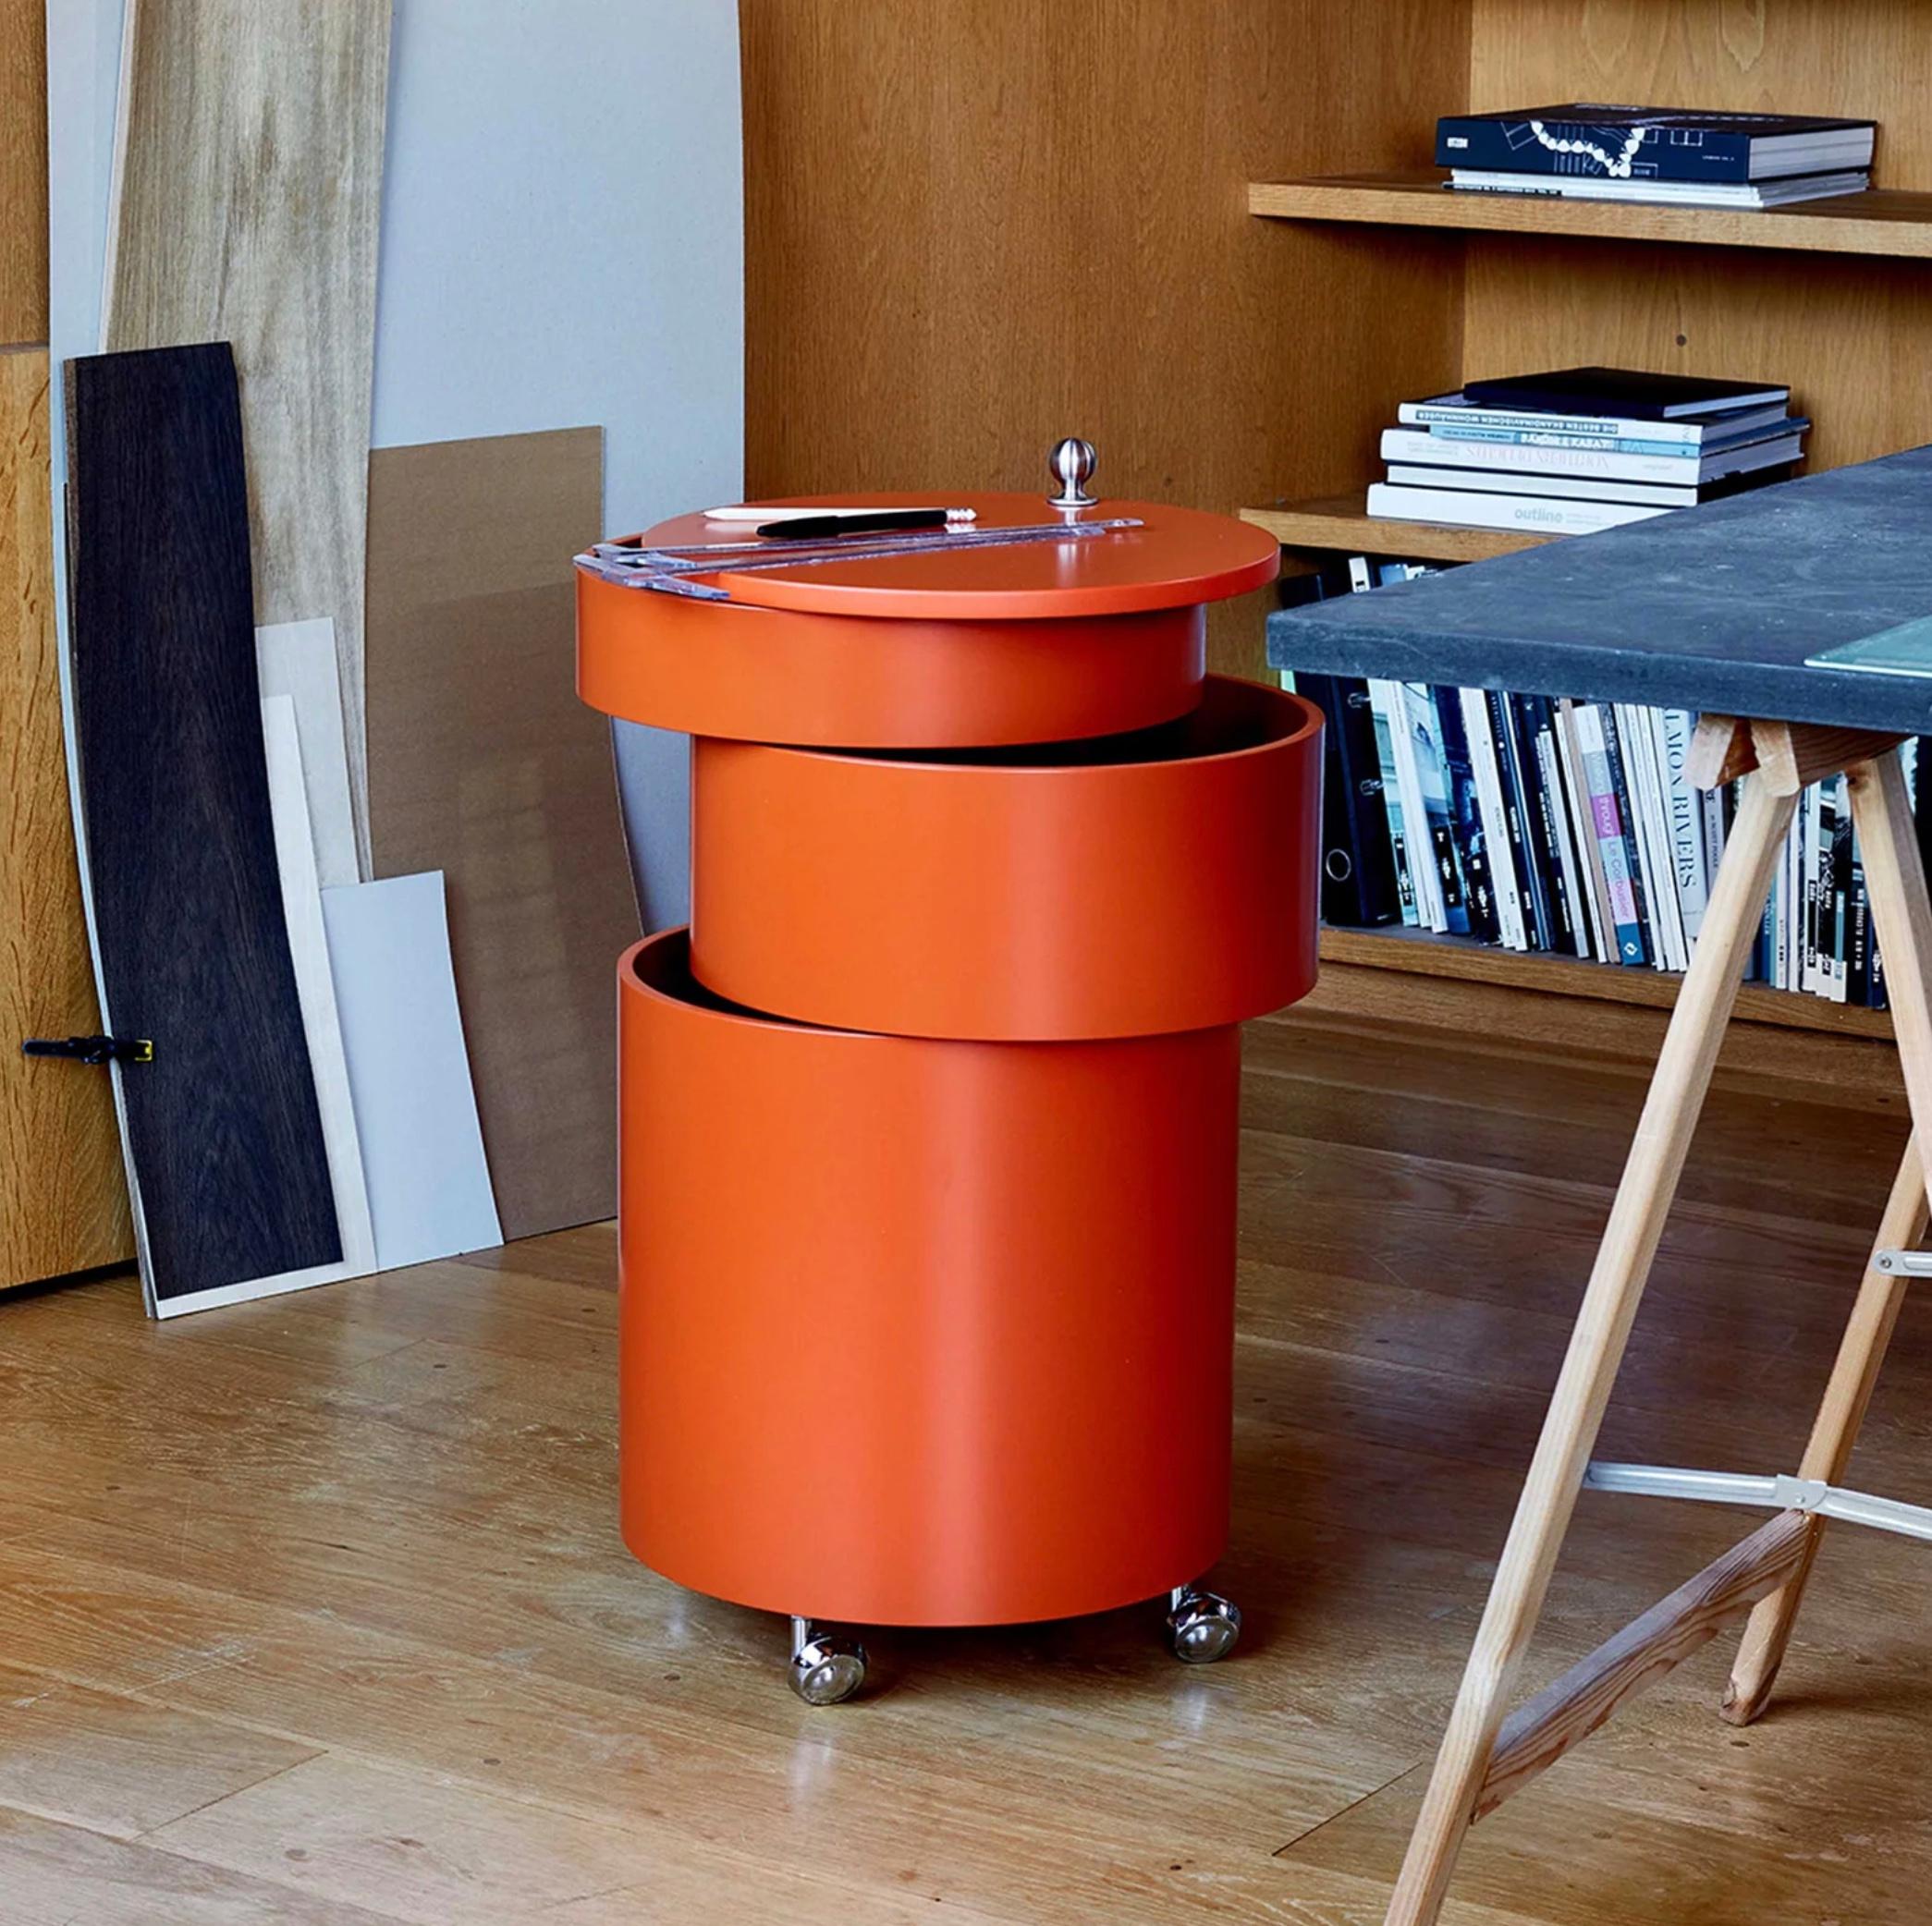 Verner Panton 'Barboy' Bar Cabinet for Verpan. Designed in 1963, current production.

Adaptable side table and mobile storage unit in one. Barboy consists of three round-shaped drawers, which can be pulled out fully so the whole surface can be used.